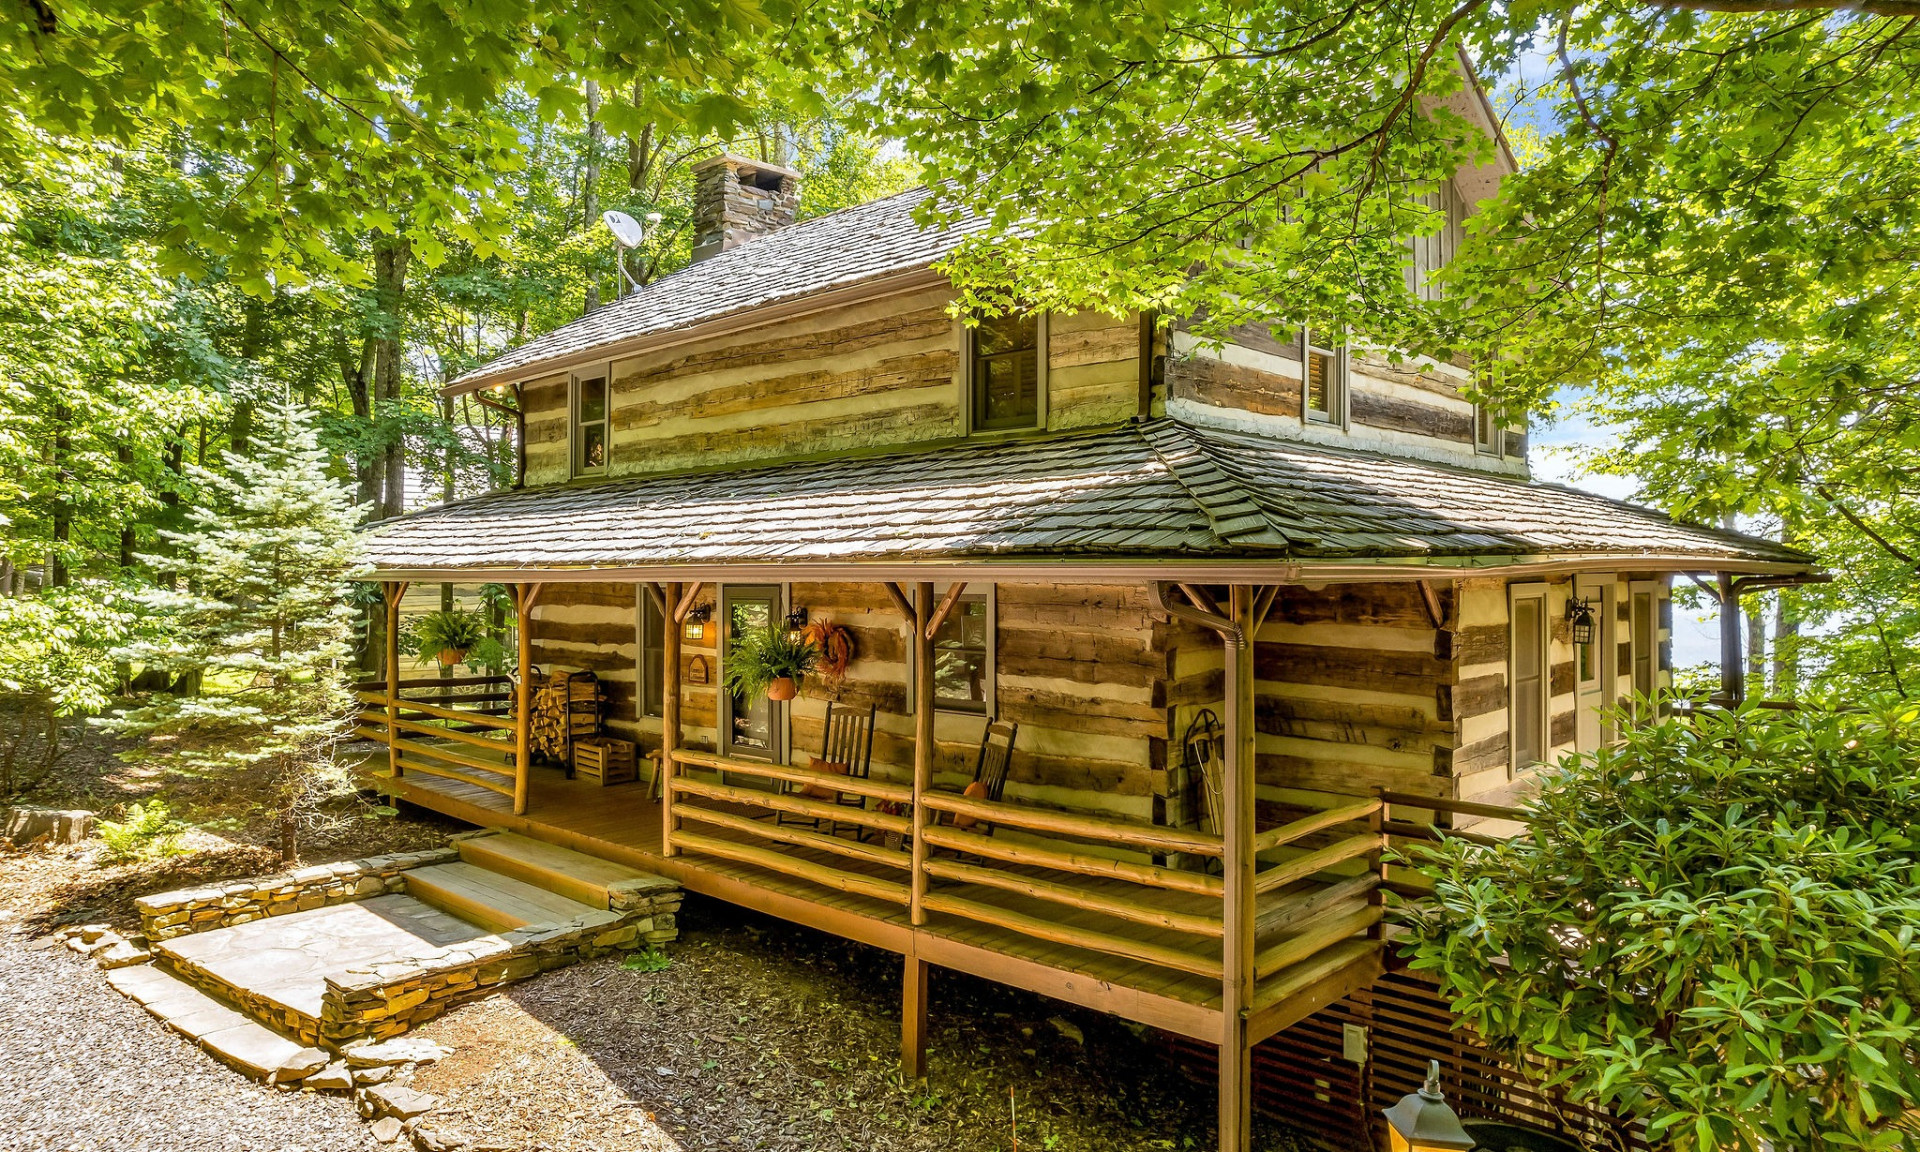 Timeless Antique Log Home in the community of Stonebridge located between West Jefferson & Boone.